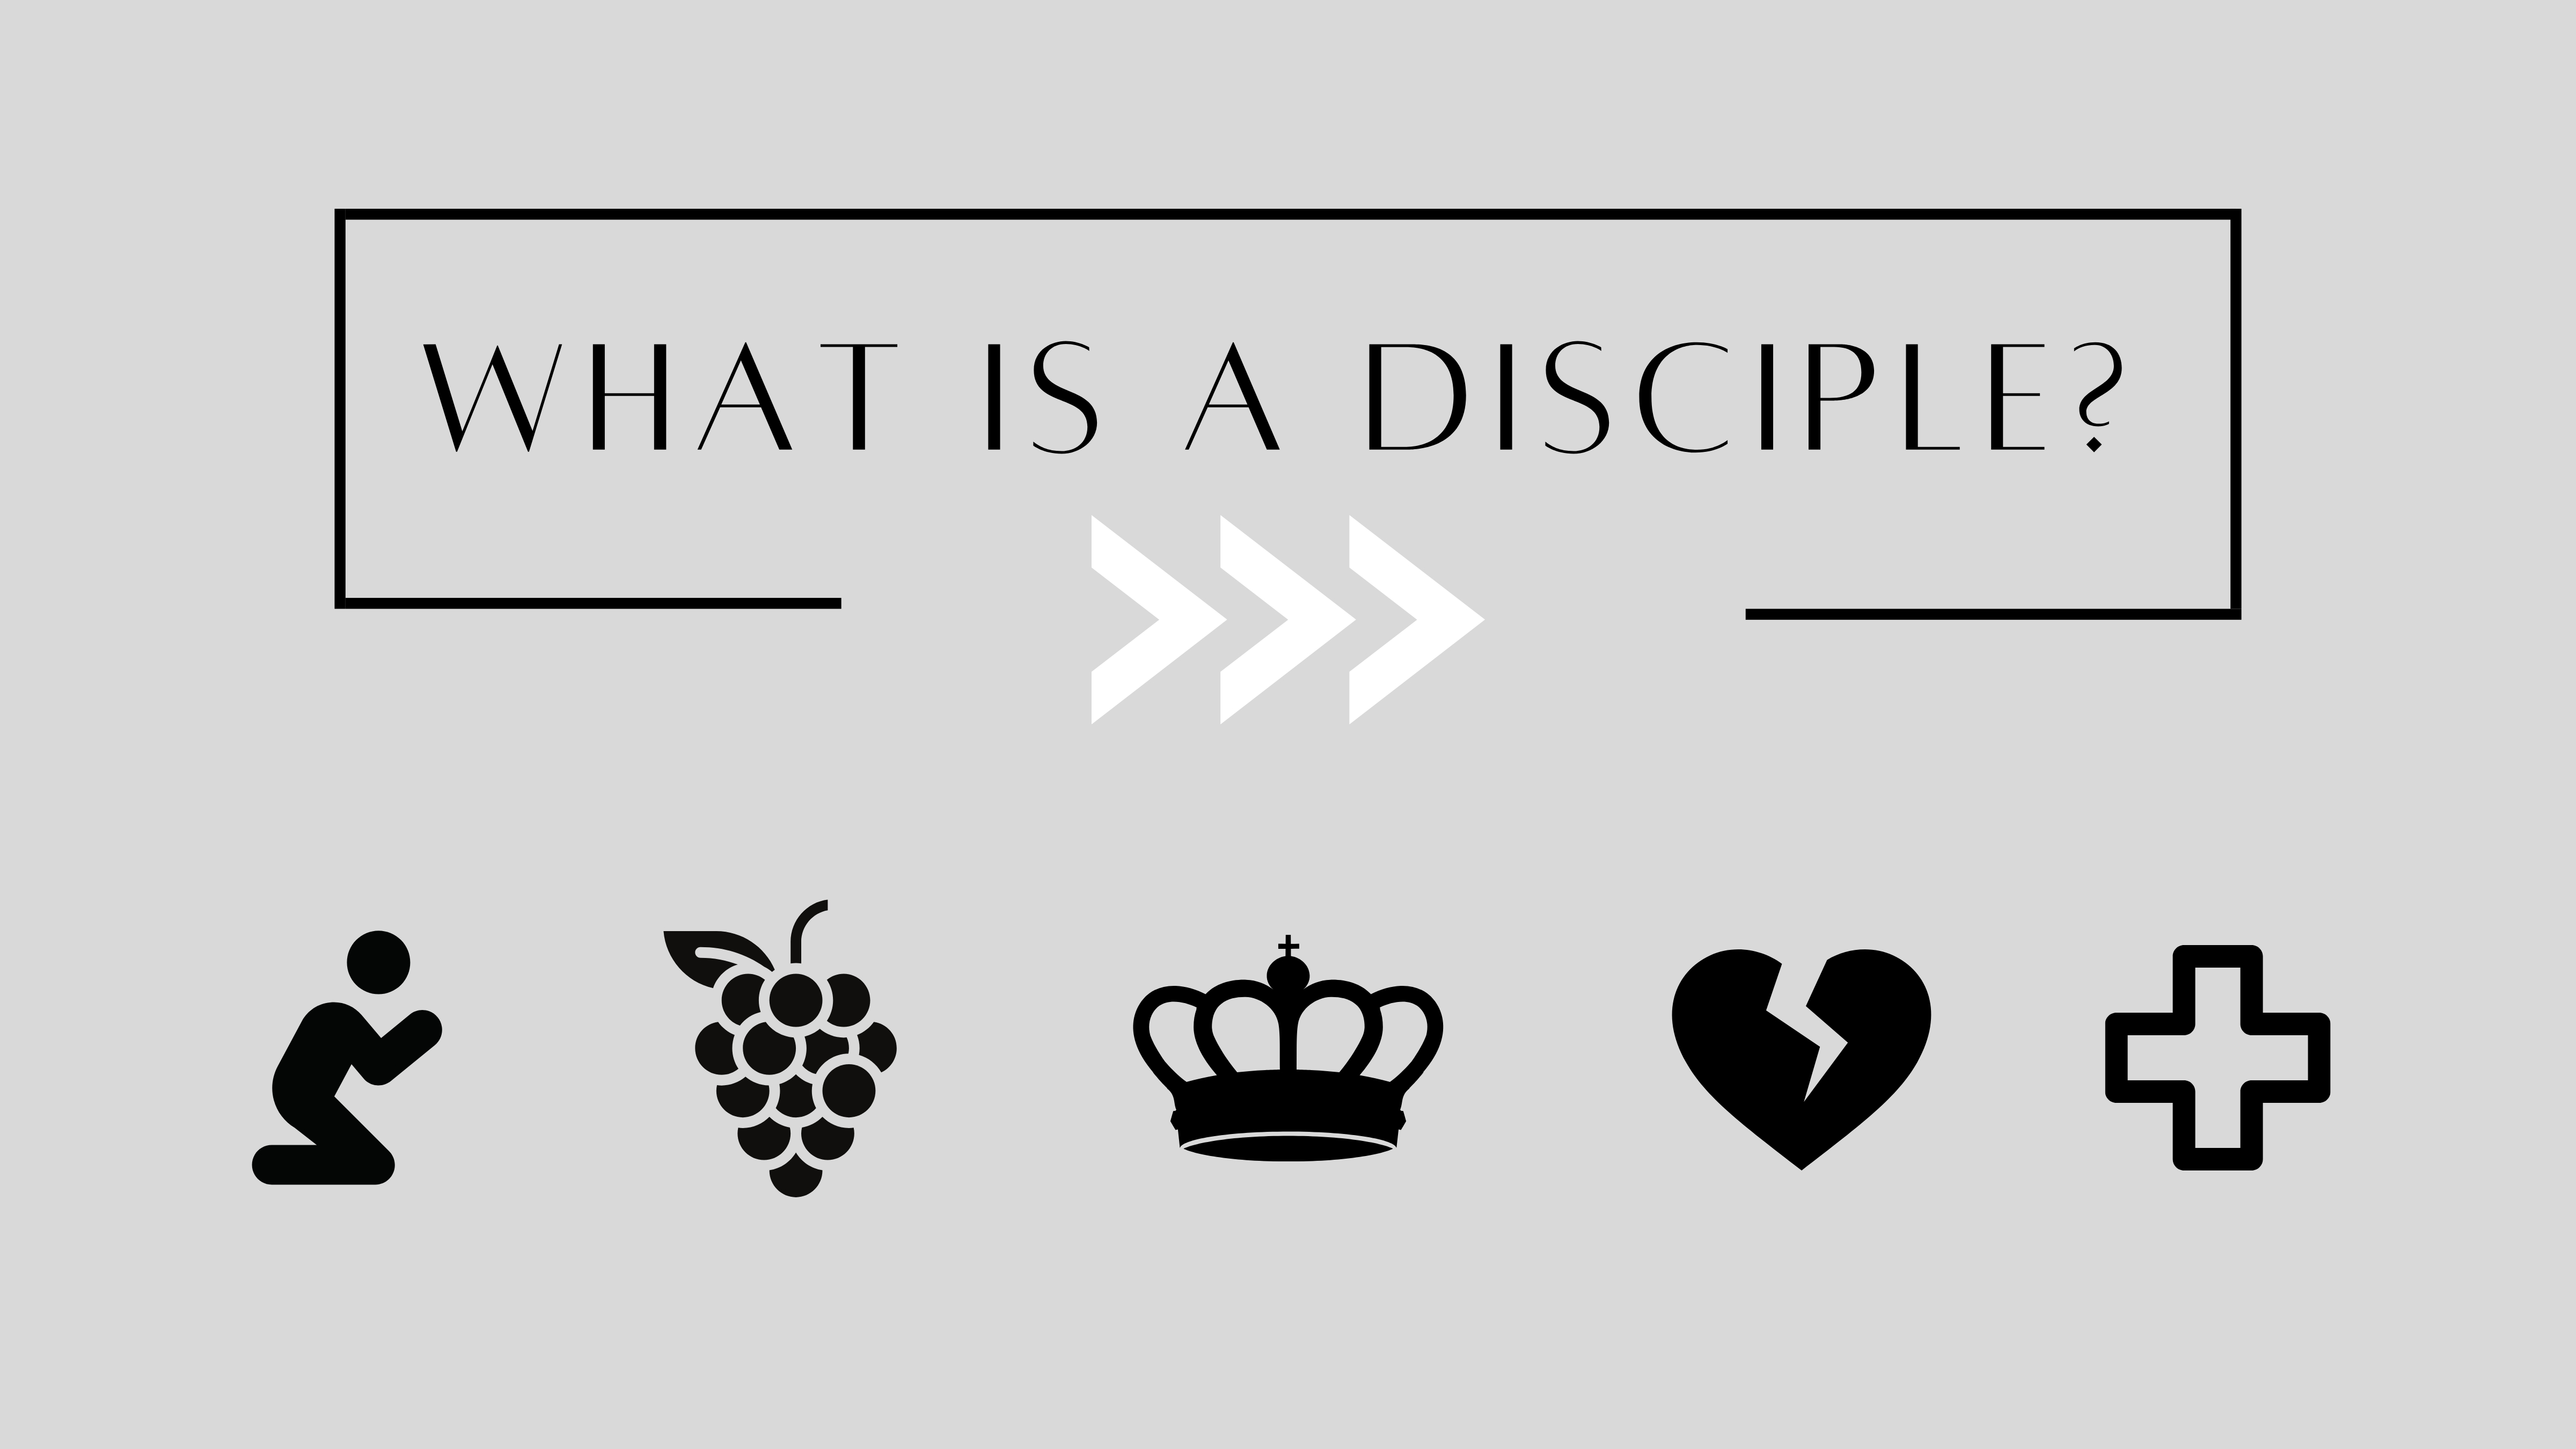 1140-what-is-a-disciple-slides-1672698037498.jpg